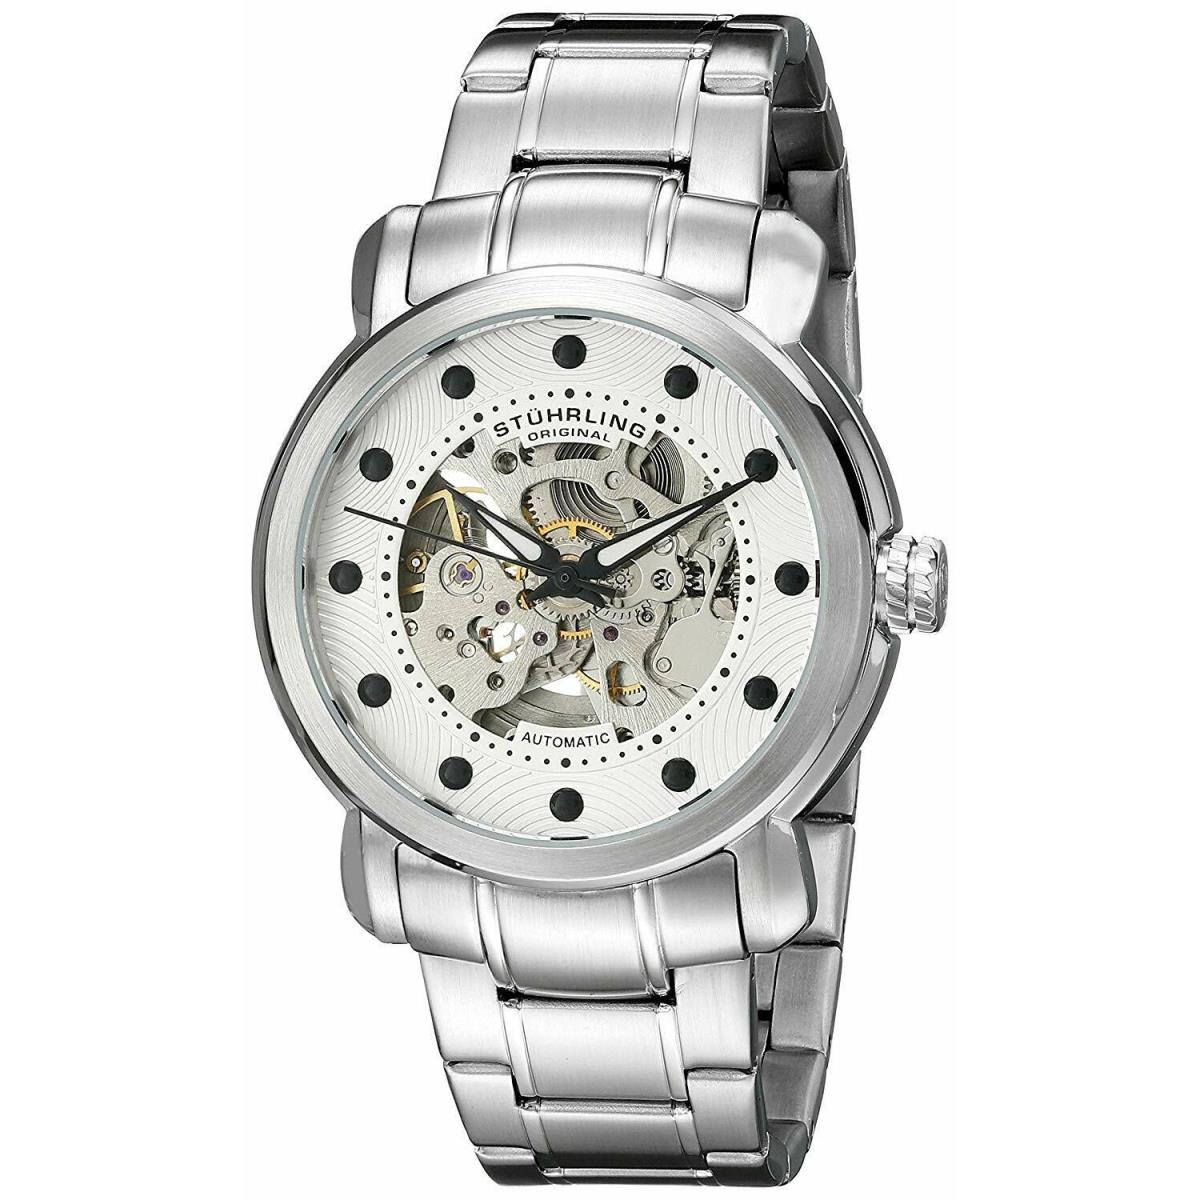 Stuhrling Men`s 644.01 Legacy Automatic Self-wind Skeleton Silver / White Watch - White Face, Silver Band